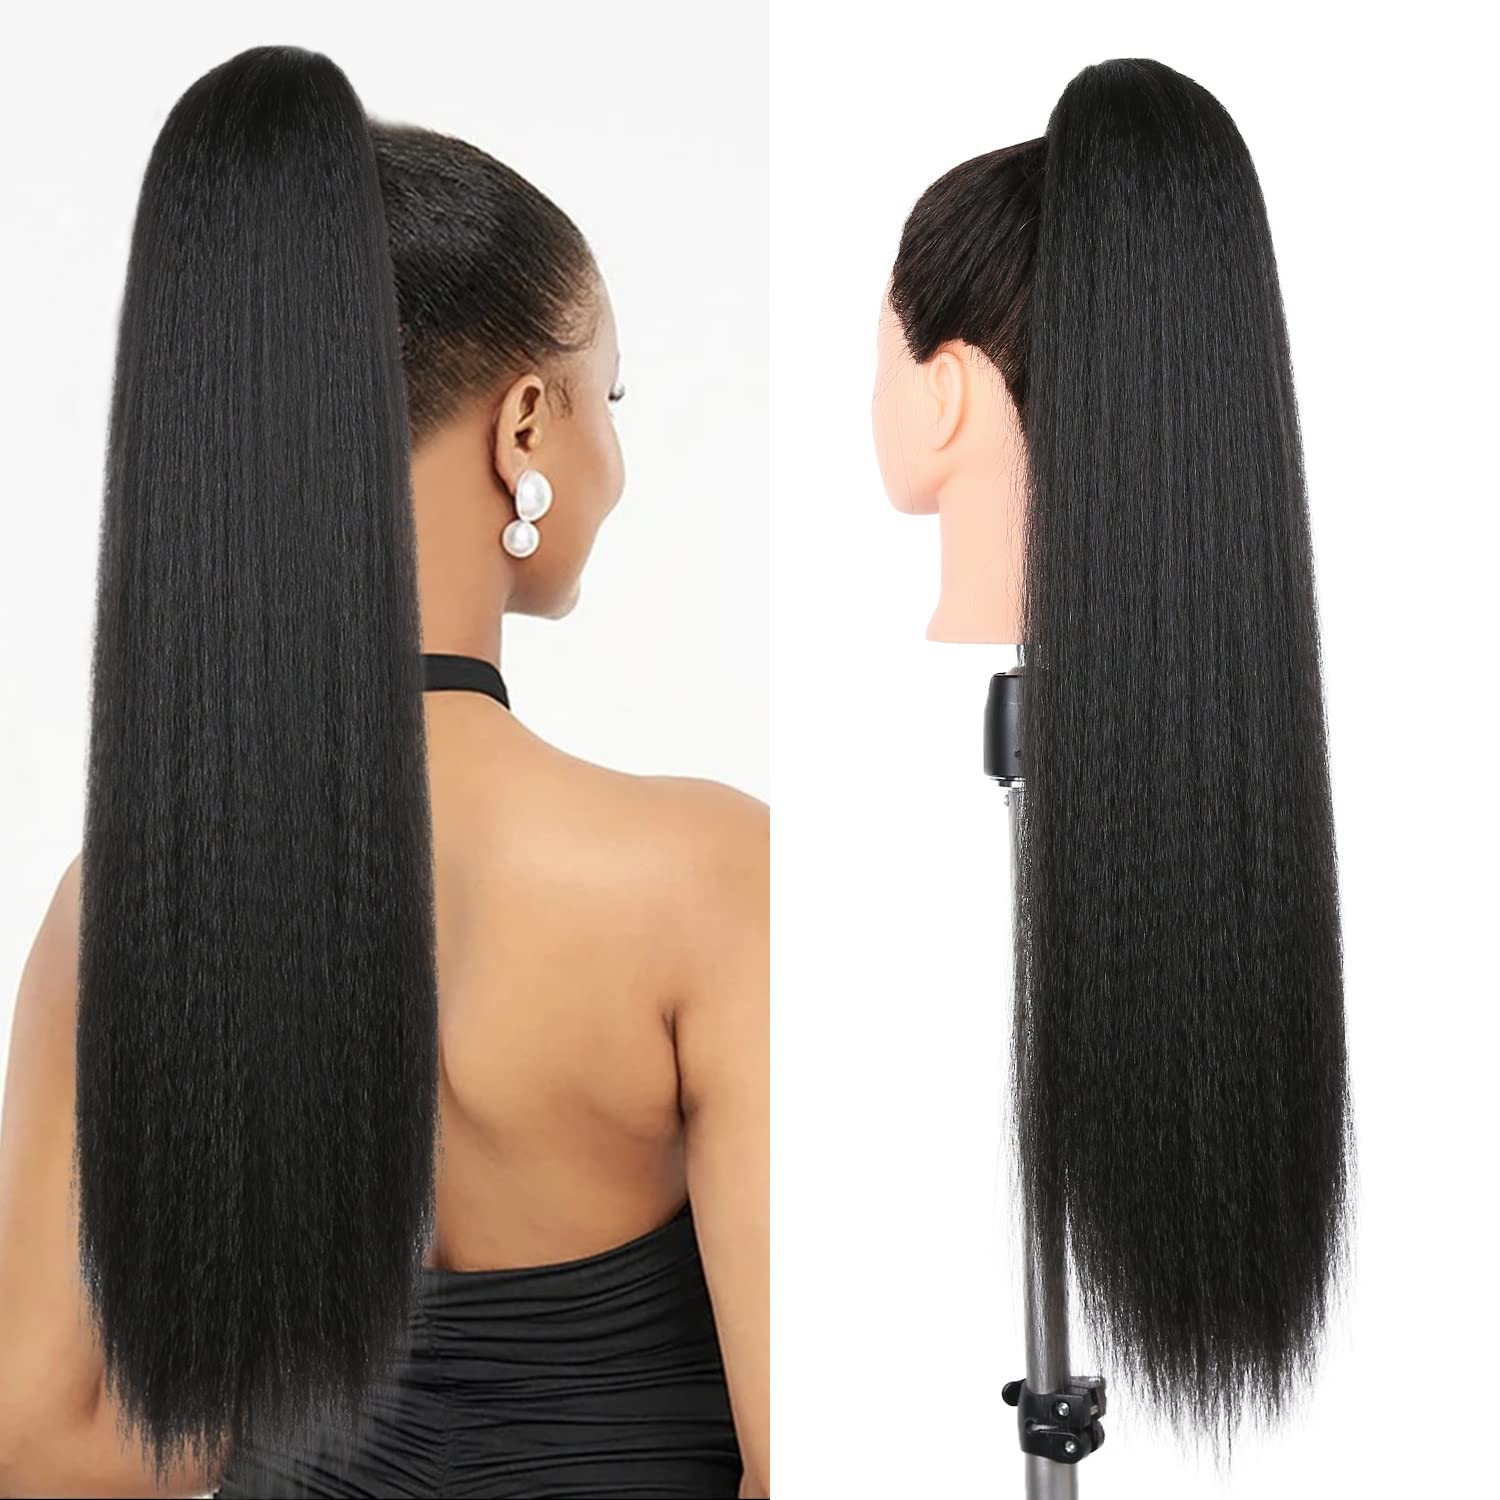 WIGNEE Kinky Straight Ponytail Wrap Around Long Ponytail Extension Natural Black